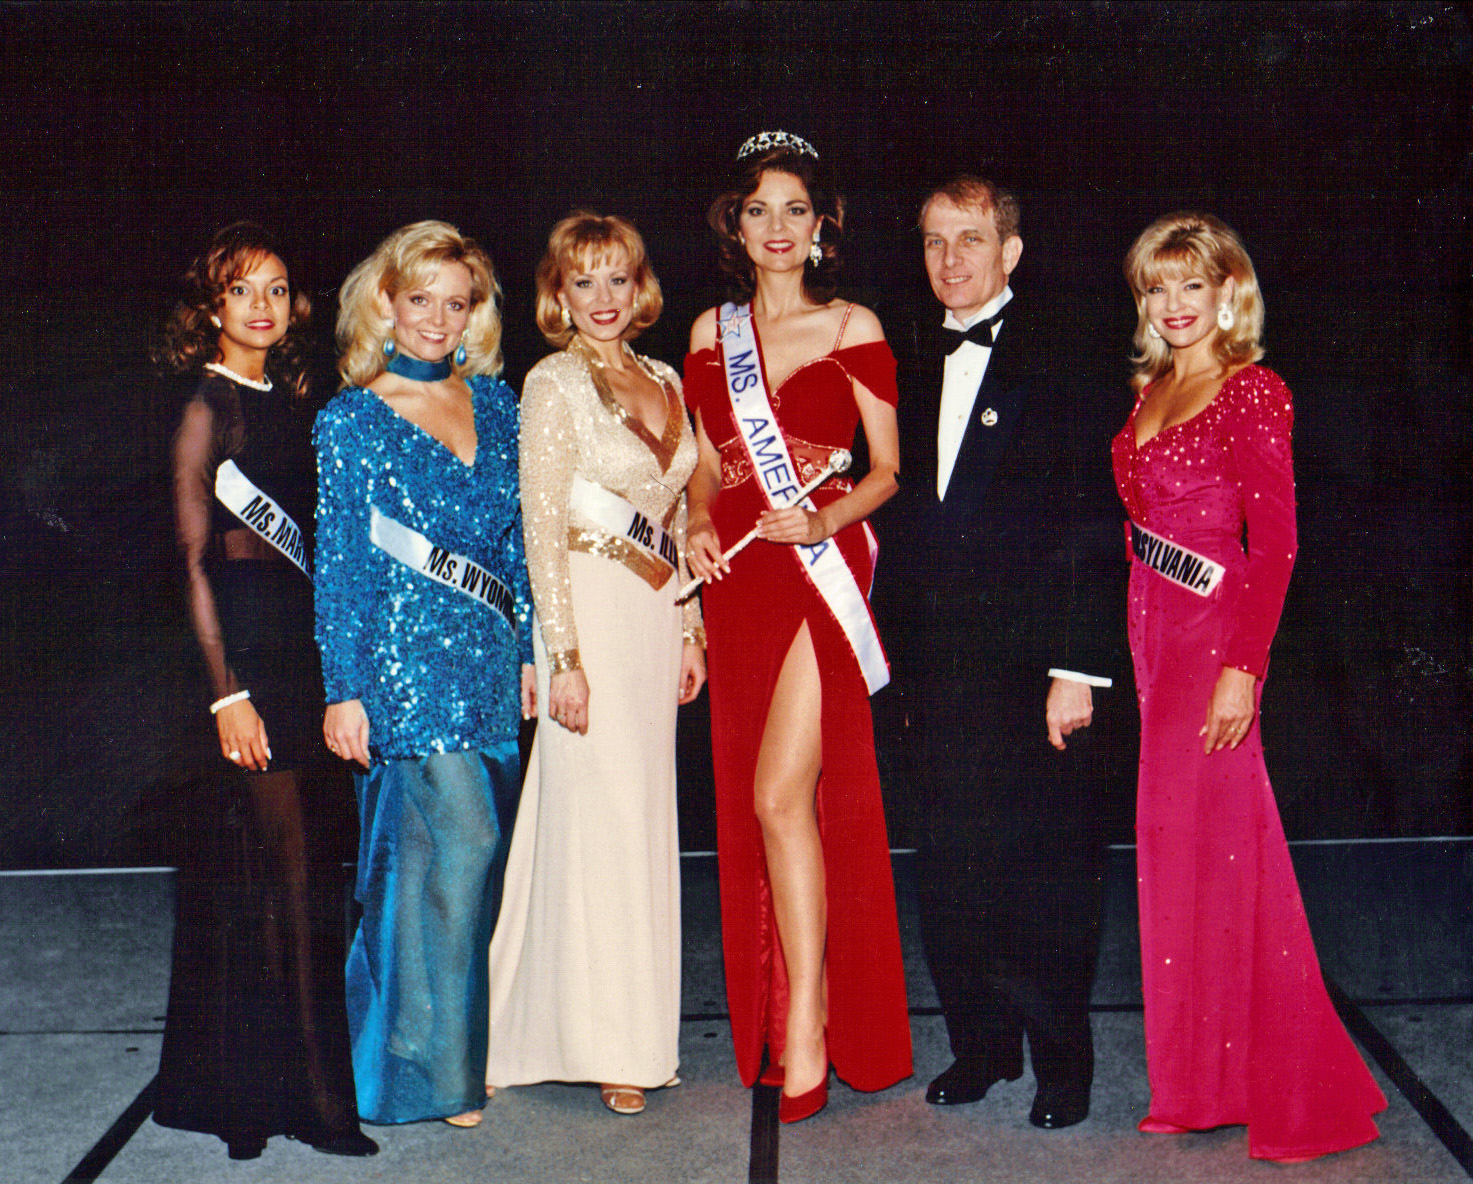 Ms. America & her court with the founder/owner of the pageant Richard Simon.